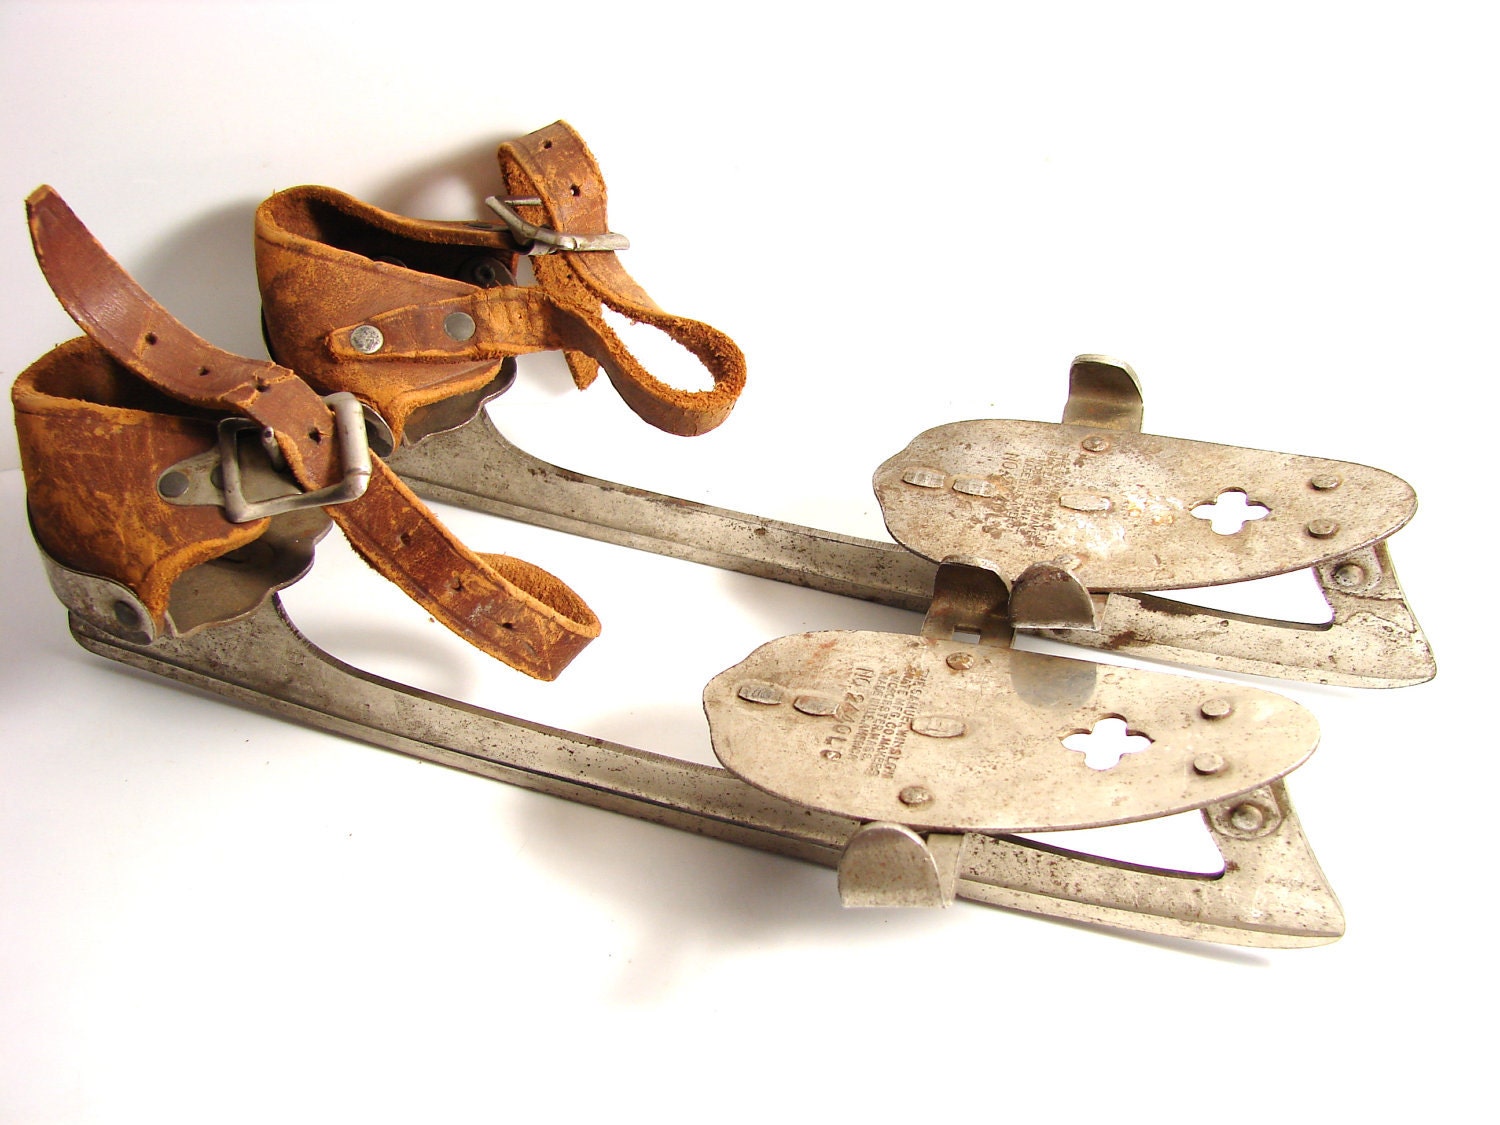 Antique Winslow's Ice Skates with Leather Straps - Collectible, Home Decor - ThirdShift